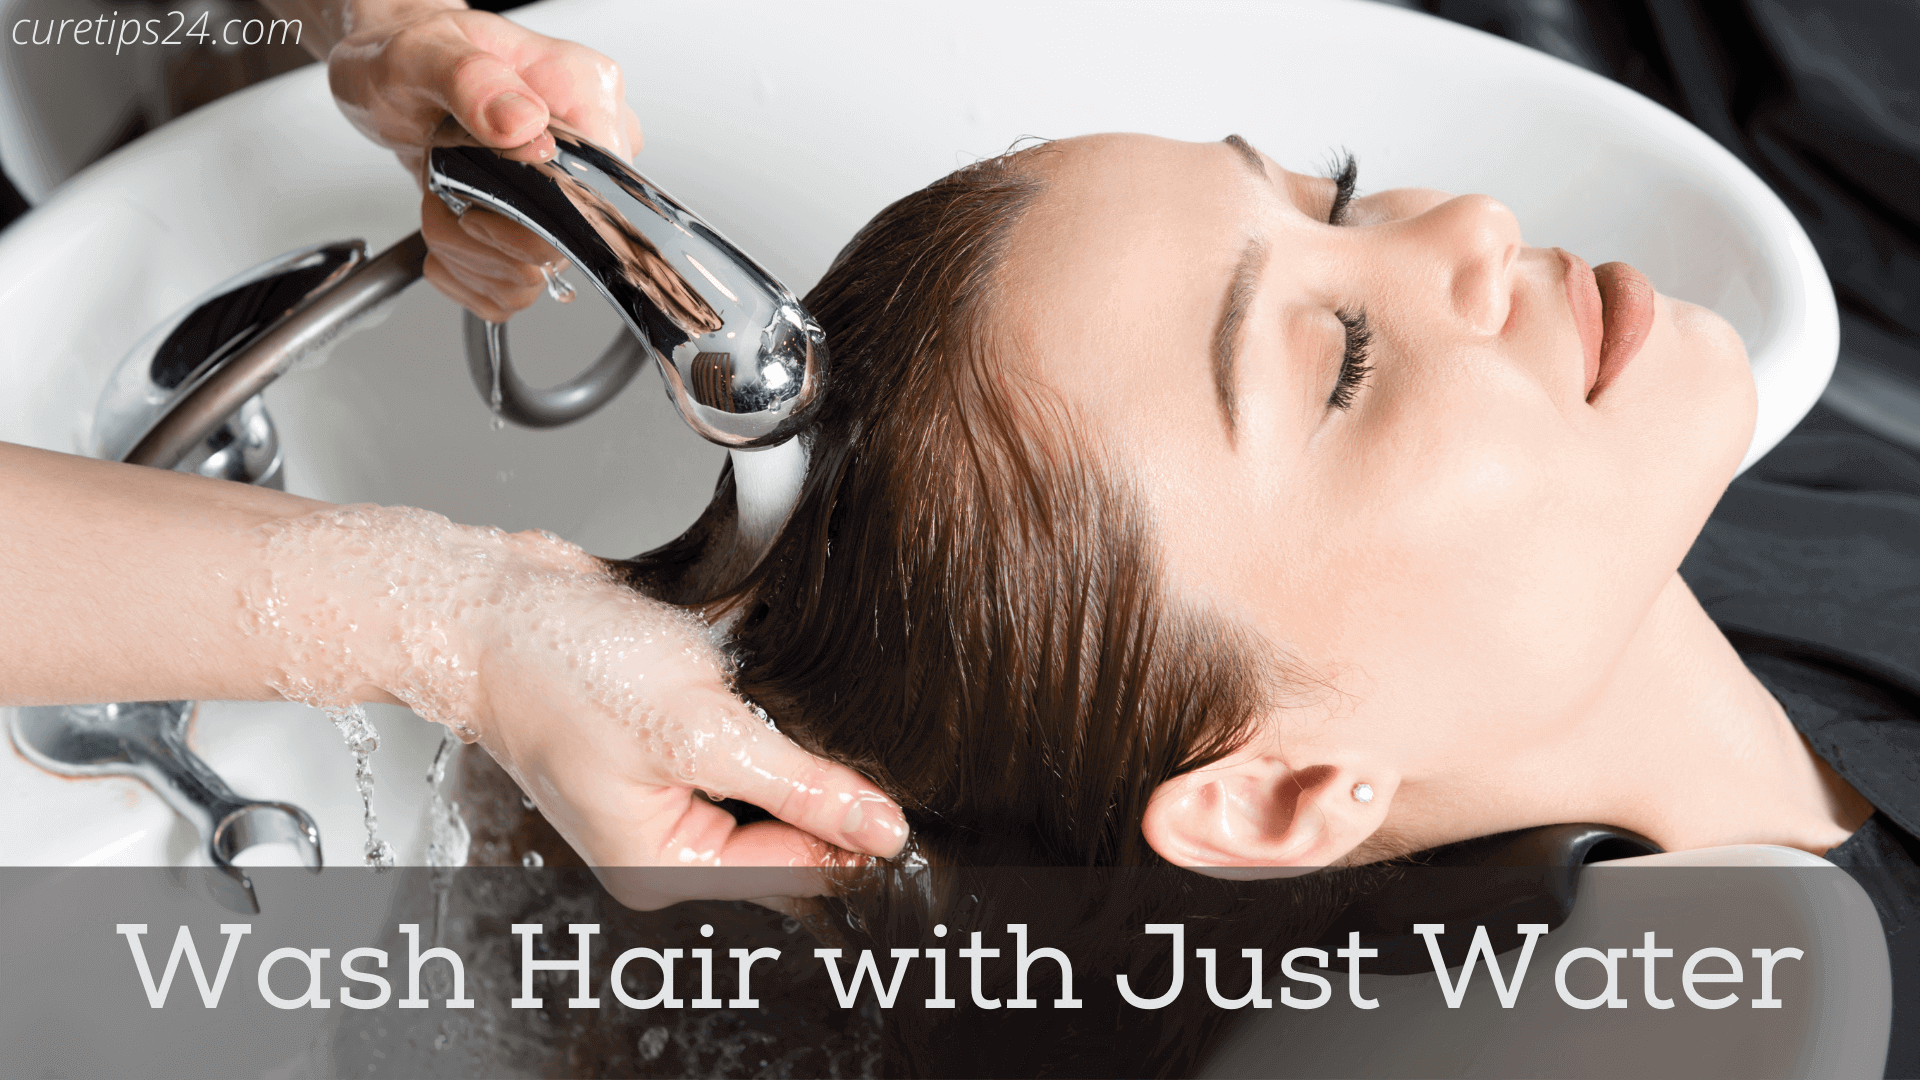 Wash hair with just water